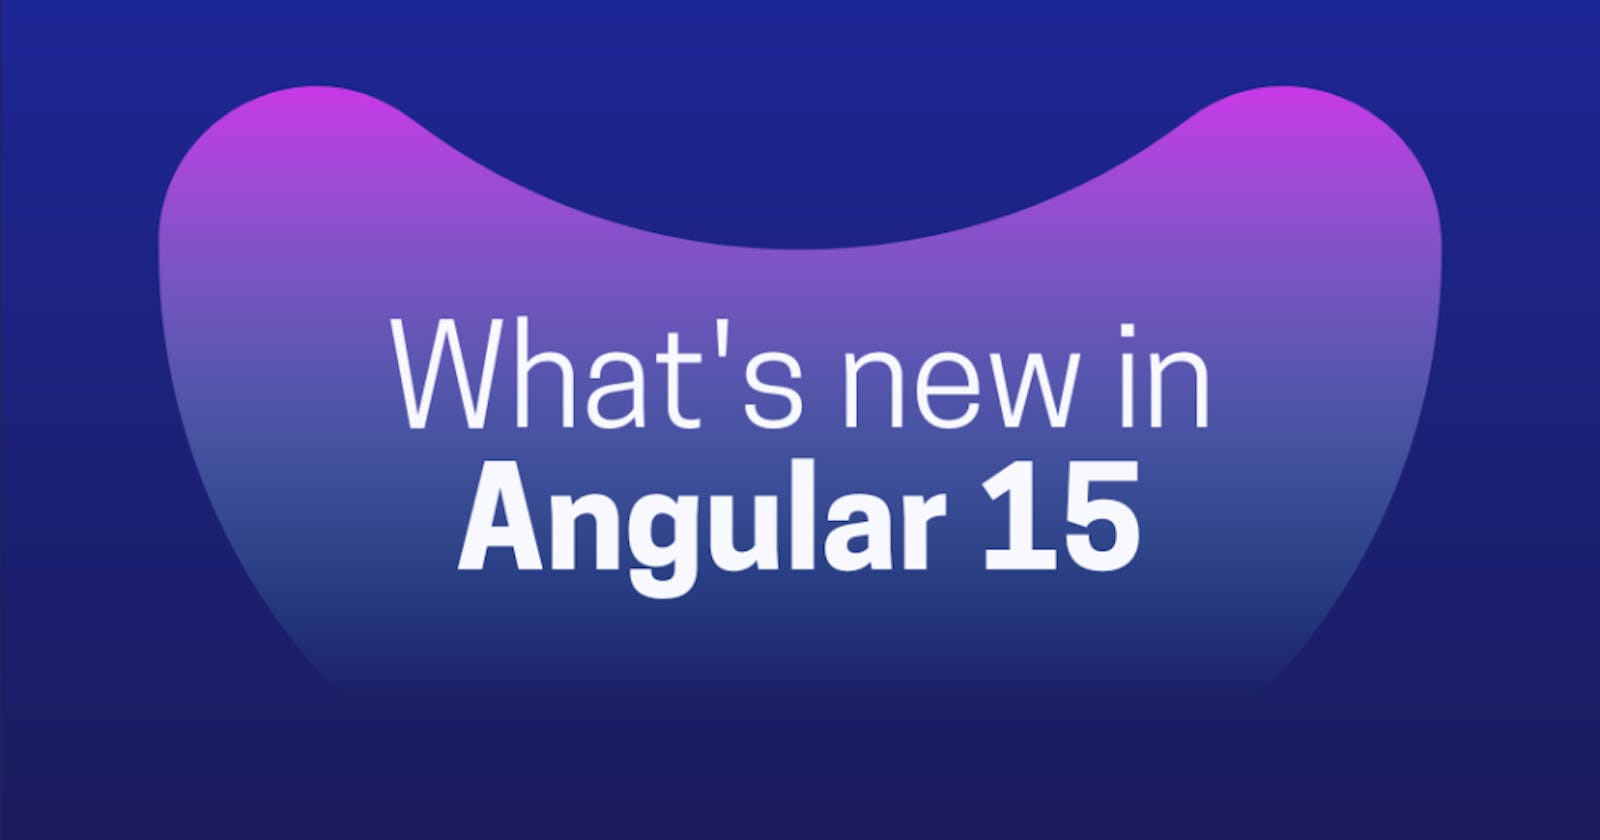 Angular 15 New Features | Angular v15 is now available!